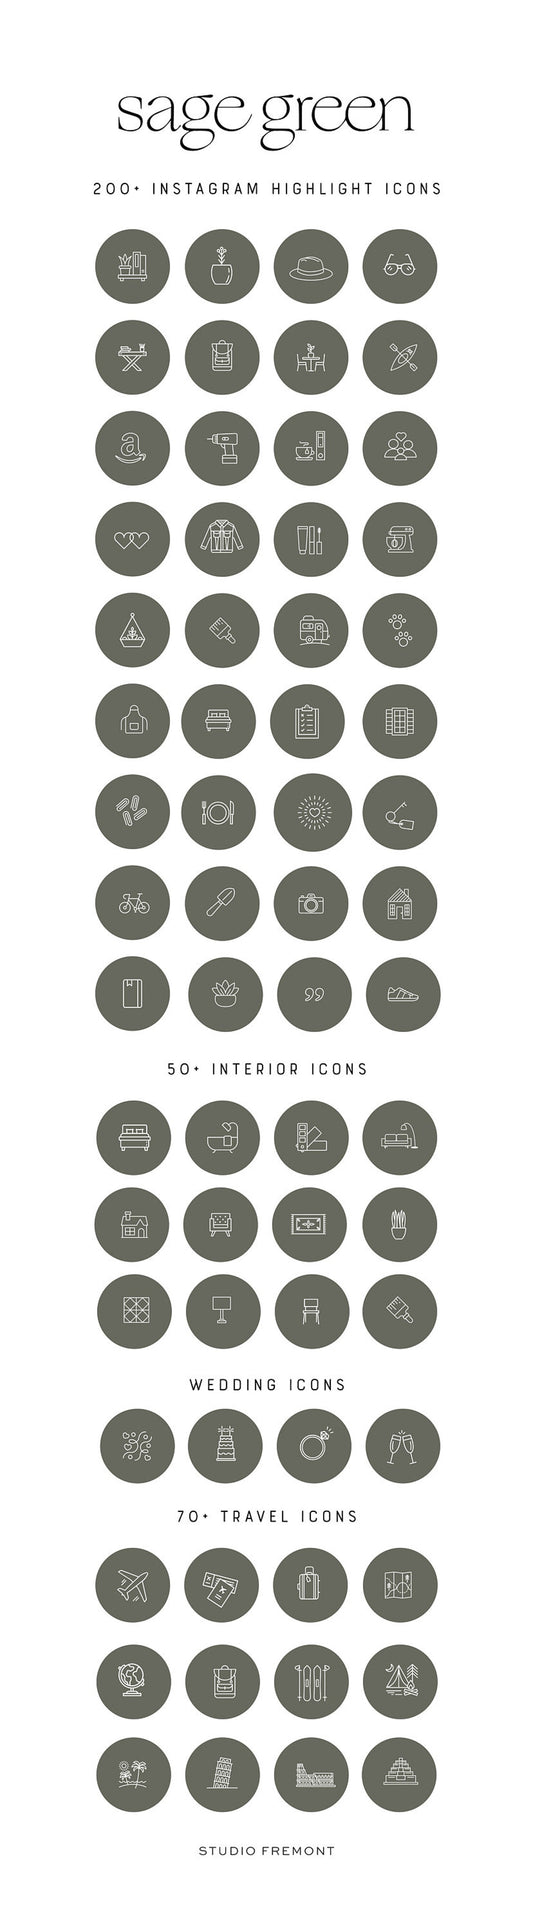 200+ Sage Instagram Highlight Icon Covers